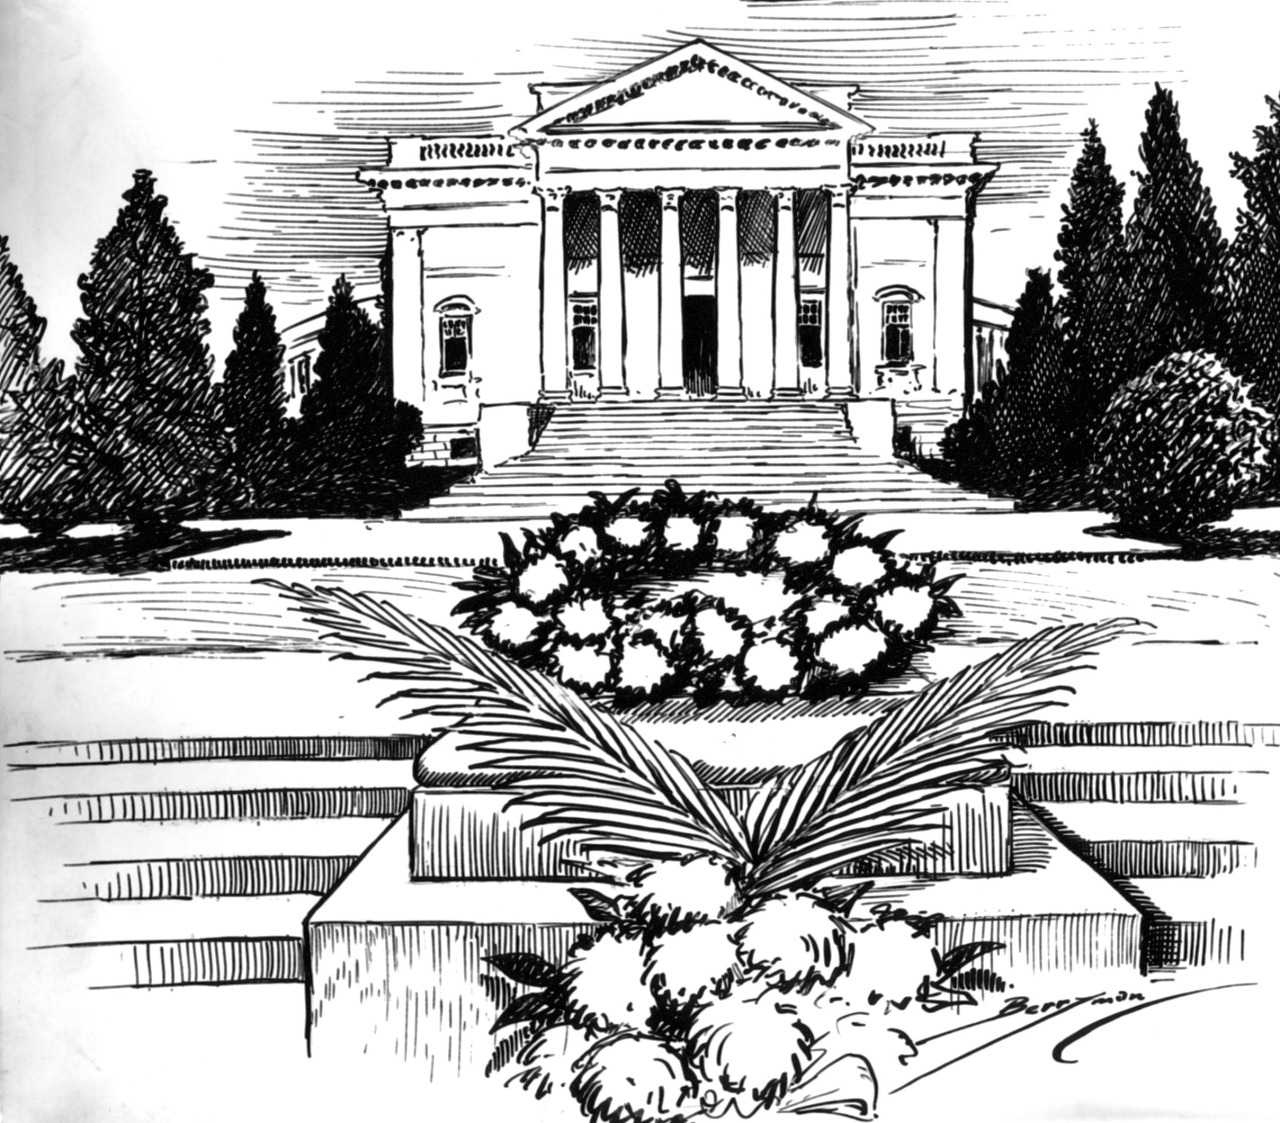 Cartoonist Clifford K. Berryman pays tribute to fallen veterans on this Armistice Day with the wreath-covered tomb of the unknown soldier at Arlington National Cemetery.